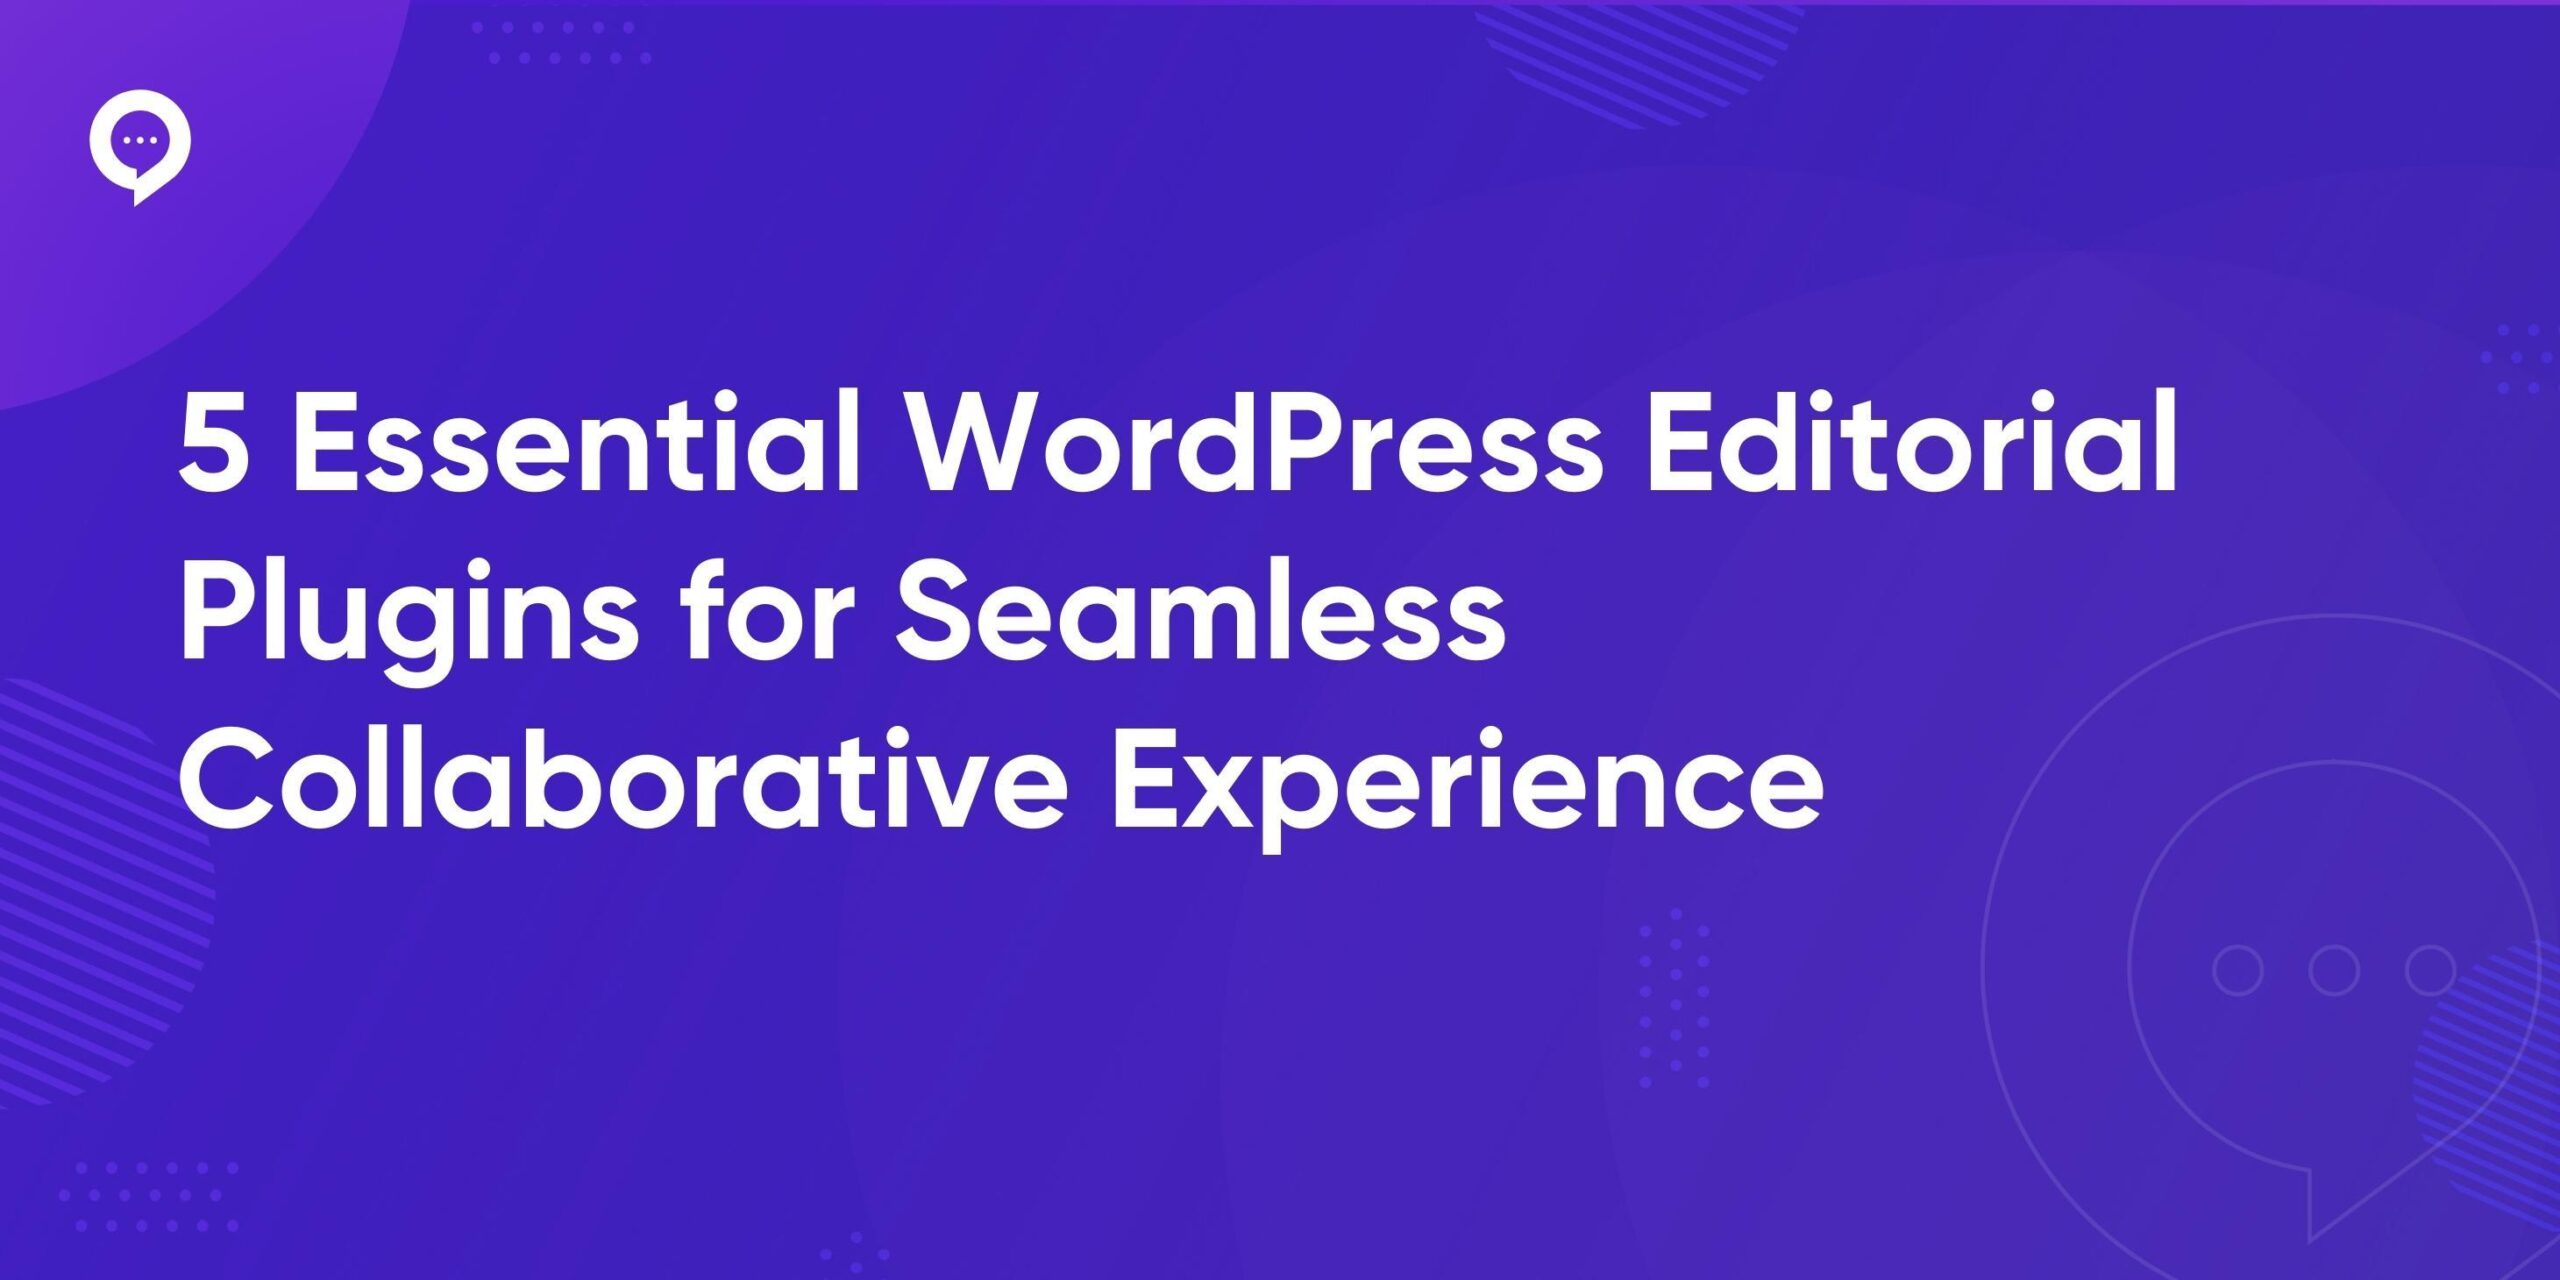 5 Essential WordPress Editorial Plugins for Seamless Collaborative Experience